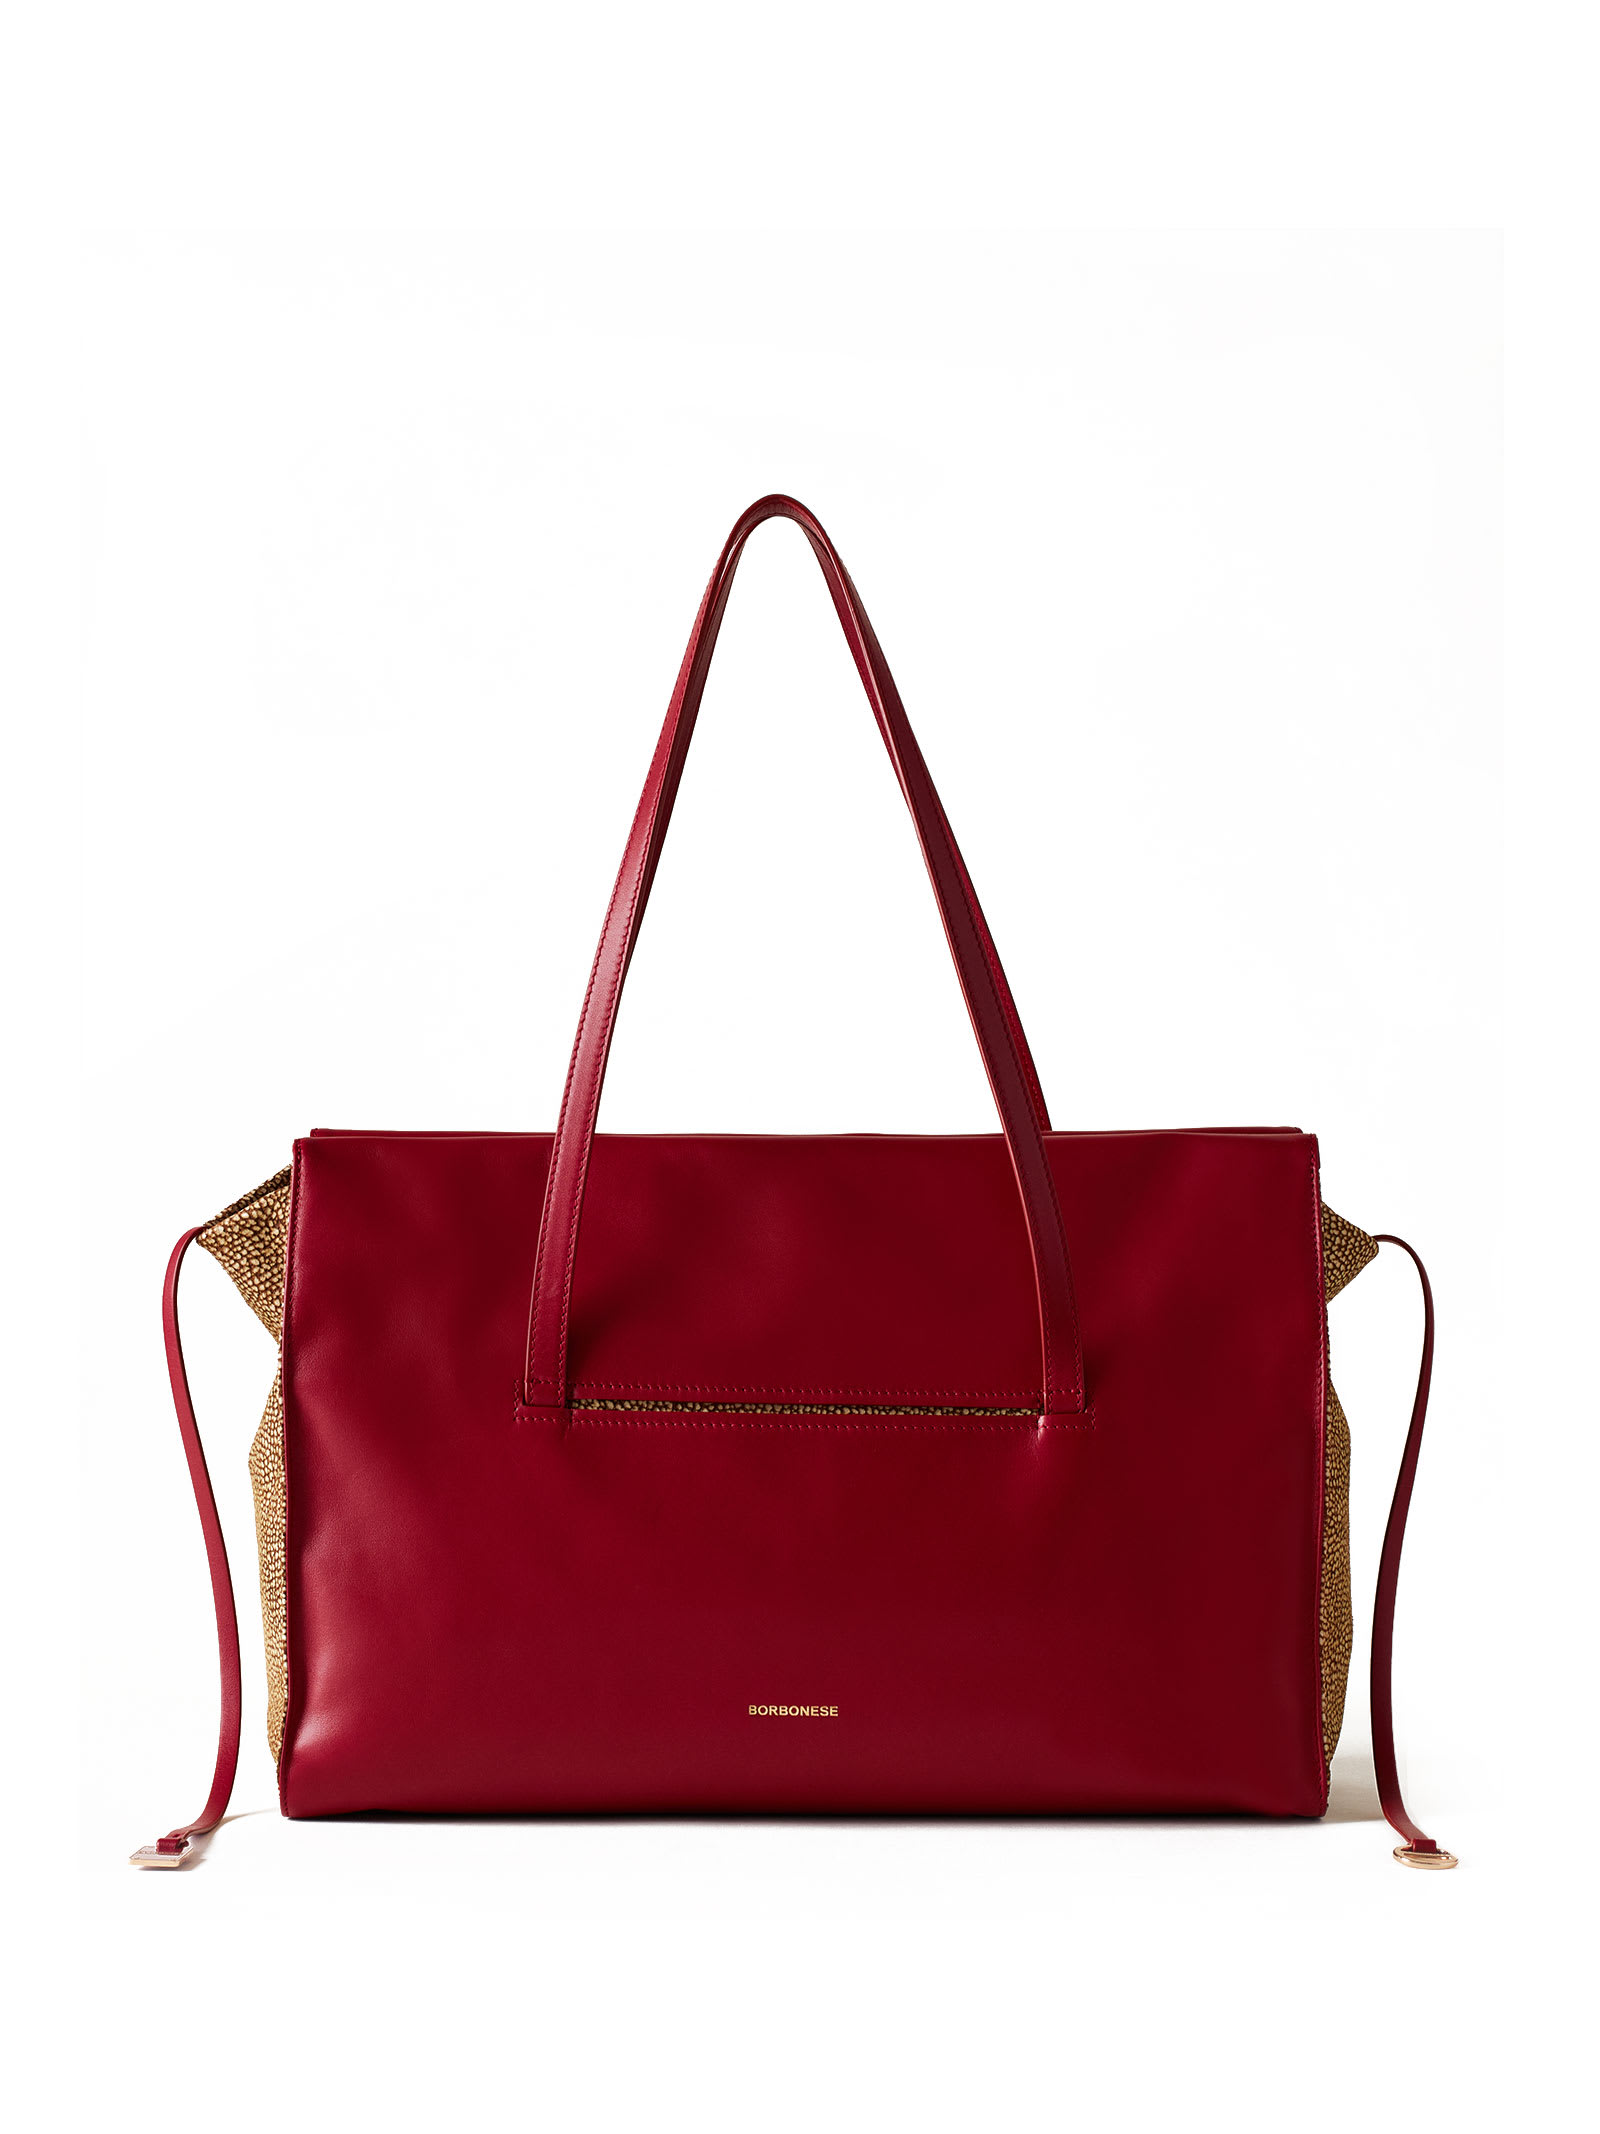 Borbonese Large Shopping Bag In Nappa Leather